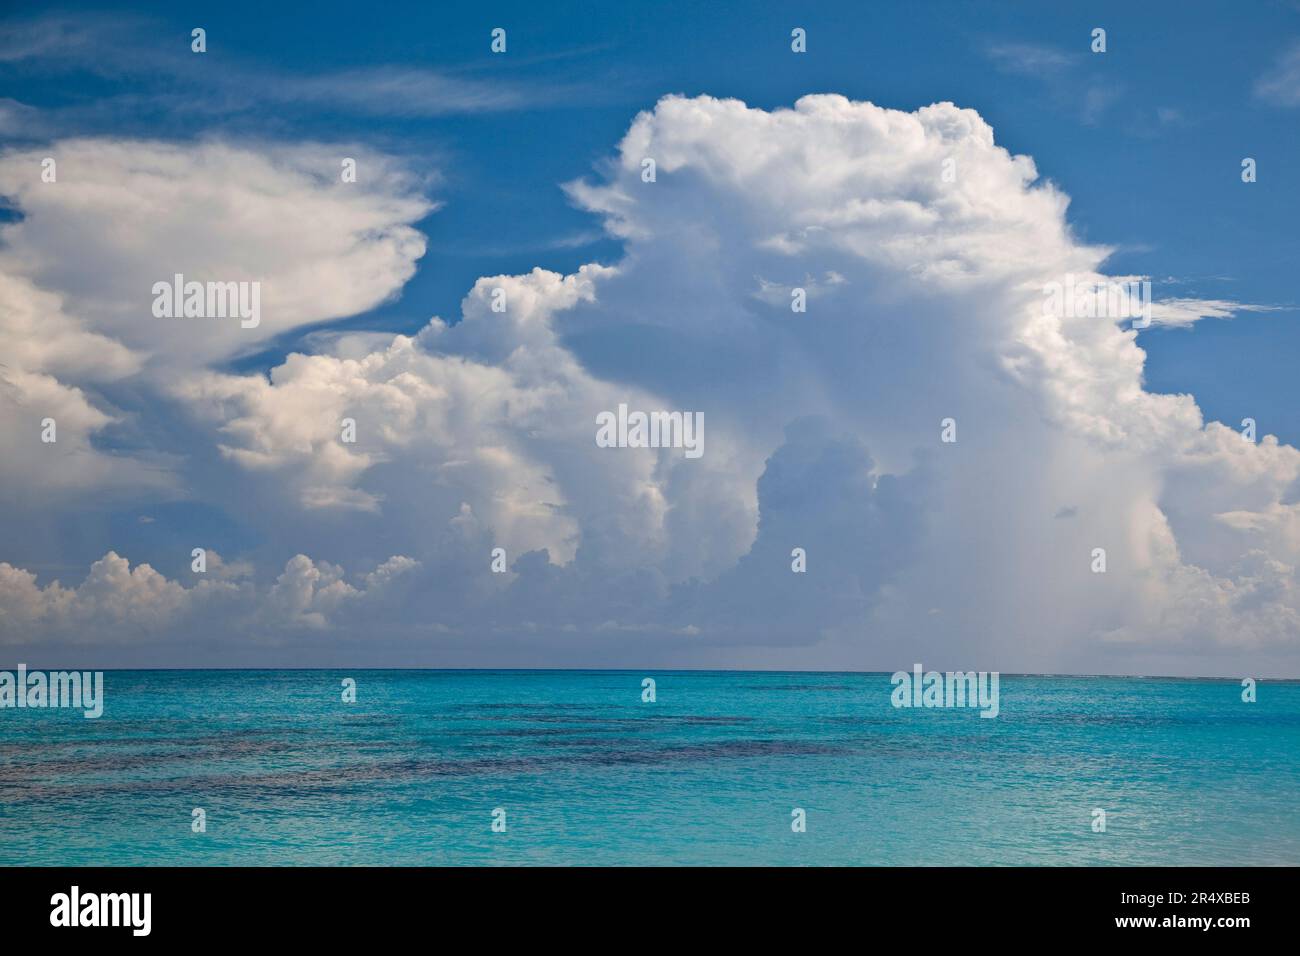 Turquoise blue water in the Seychelles Islands with cloud formations in the sky; Seychelles Stock Photo